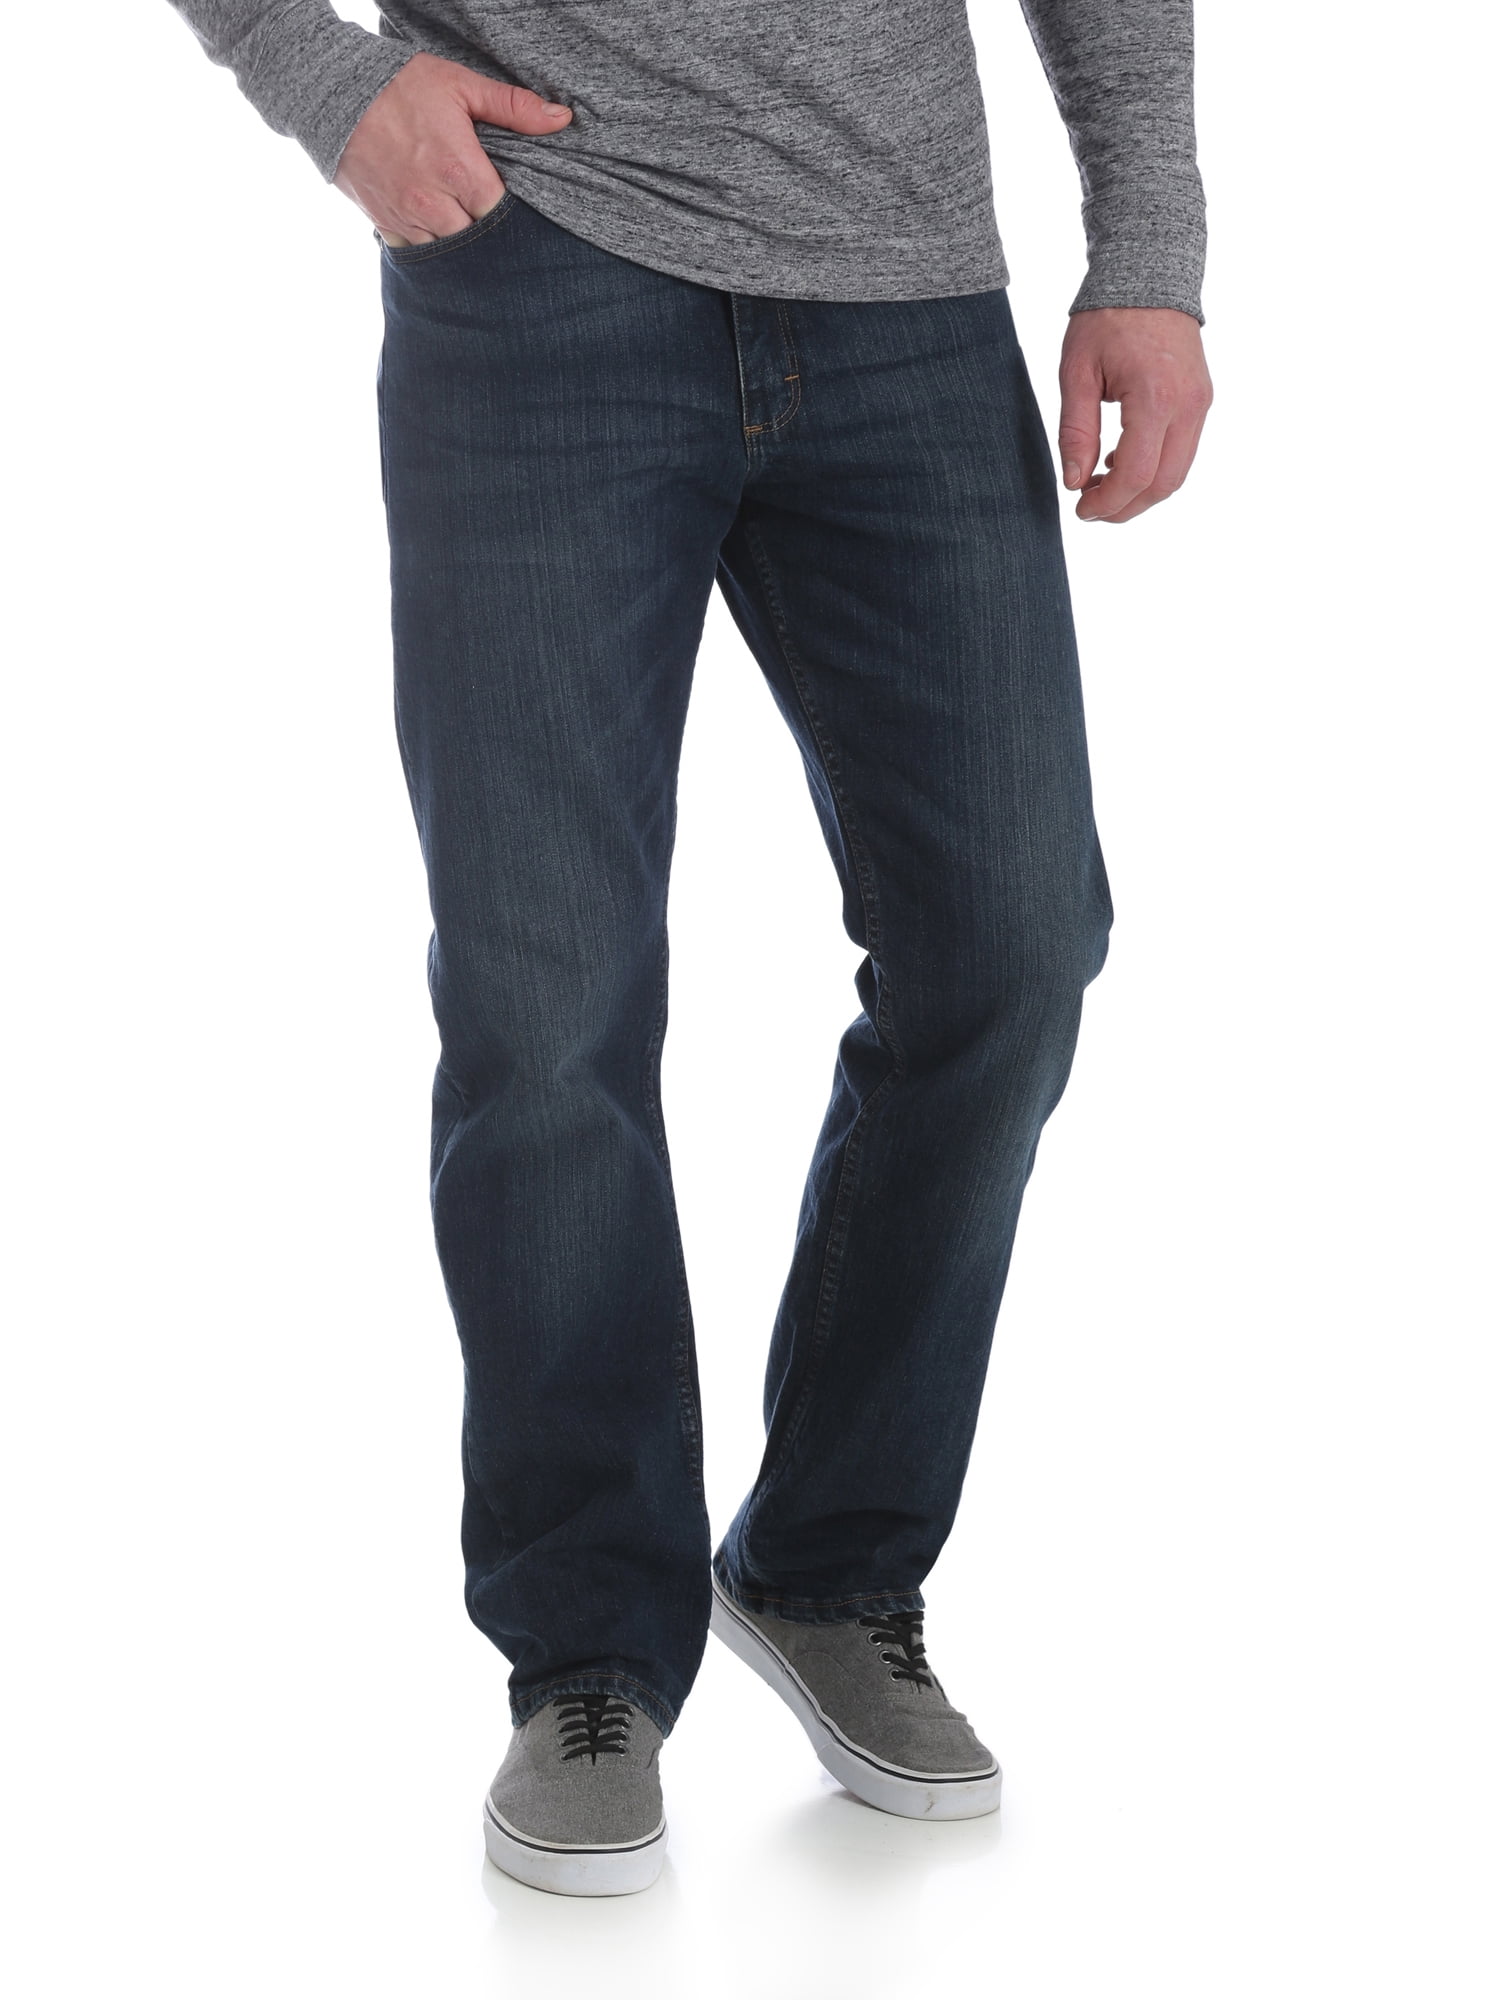 Wrangler Men's and Big Men's Relaxed Fit Jeans with Flex 